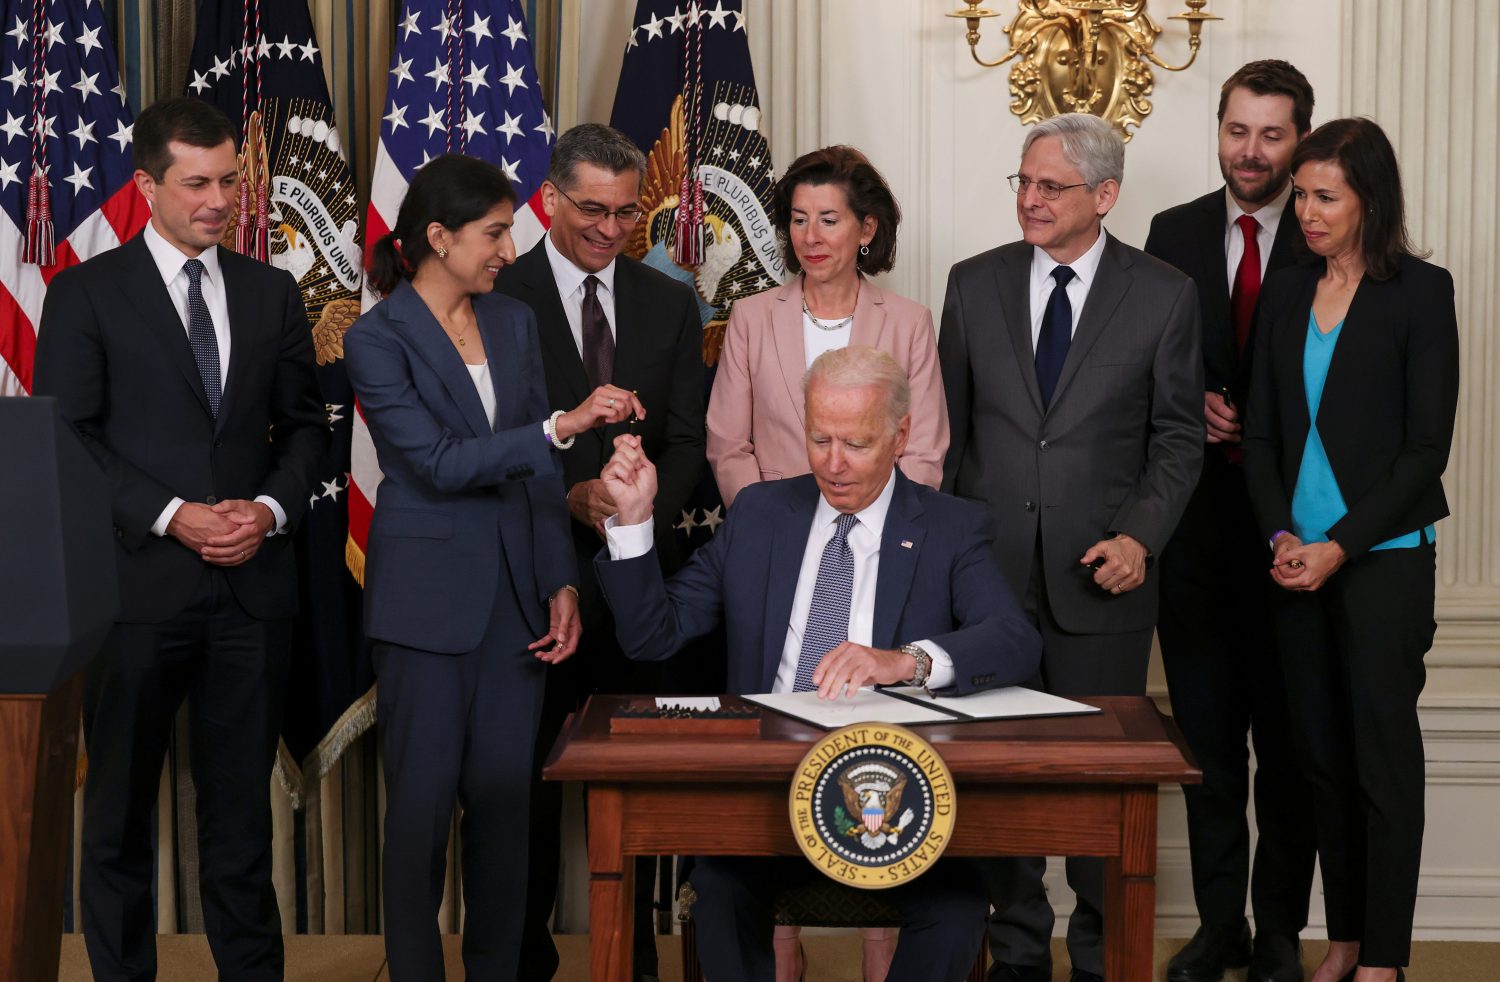 U.S. President Joe Biden hands a pen to Lina Khan, chair of the Federal Trade Commission, as he signs an executive order on "promoting competition in the American economy" as members of his Cabinet standby in the State Dining Room at the White House in Washington U.S., July 9, 2021. REUTERS/Evelyn Hockstein